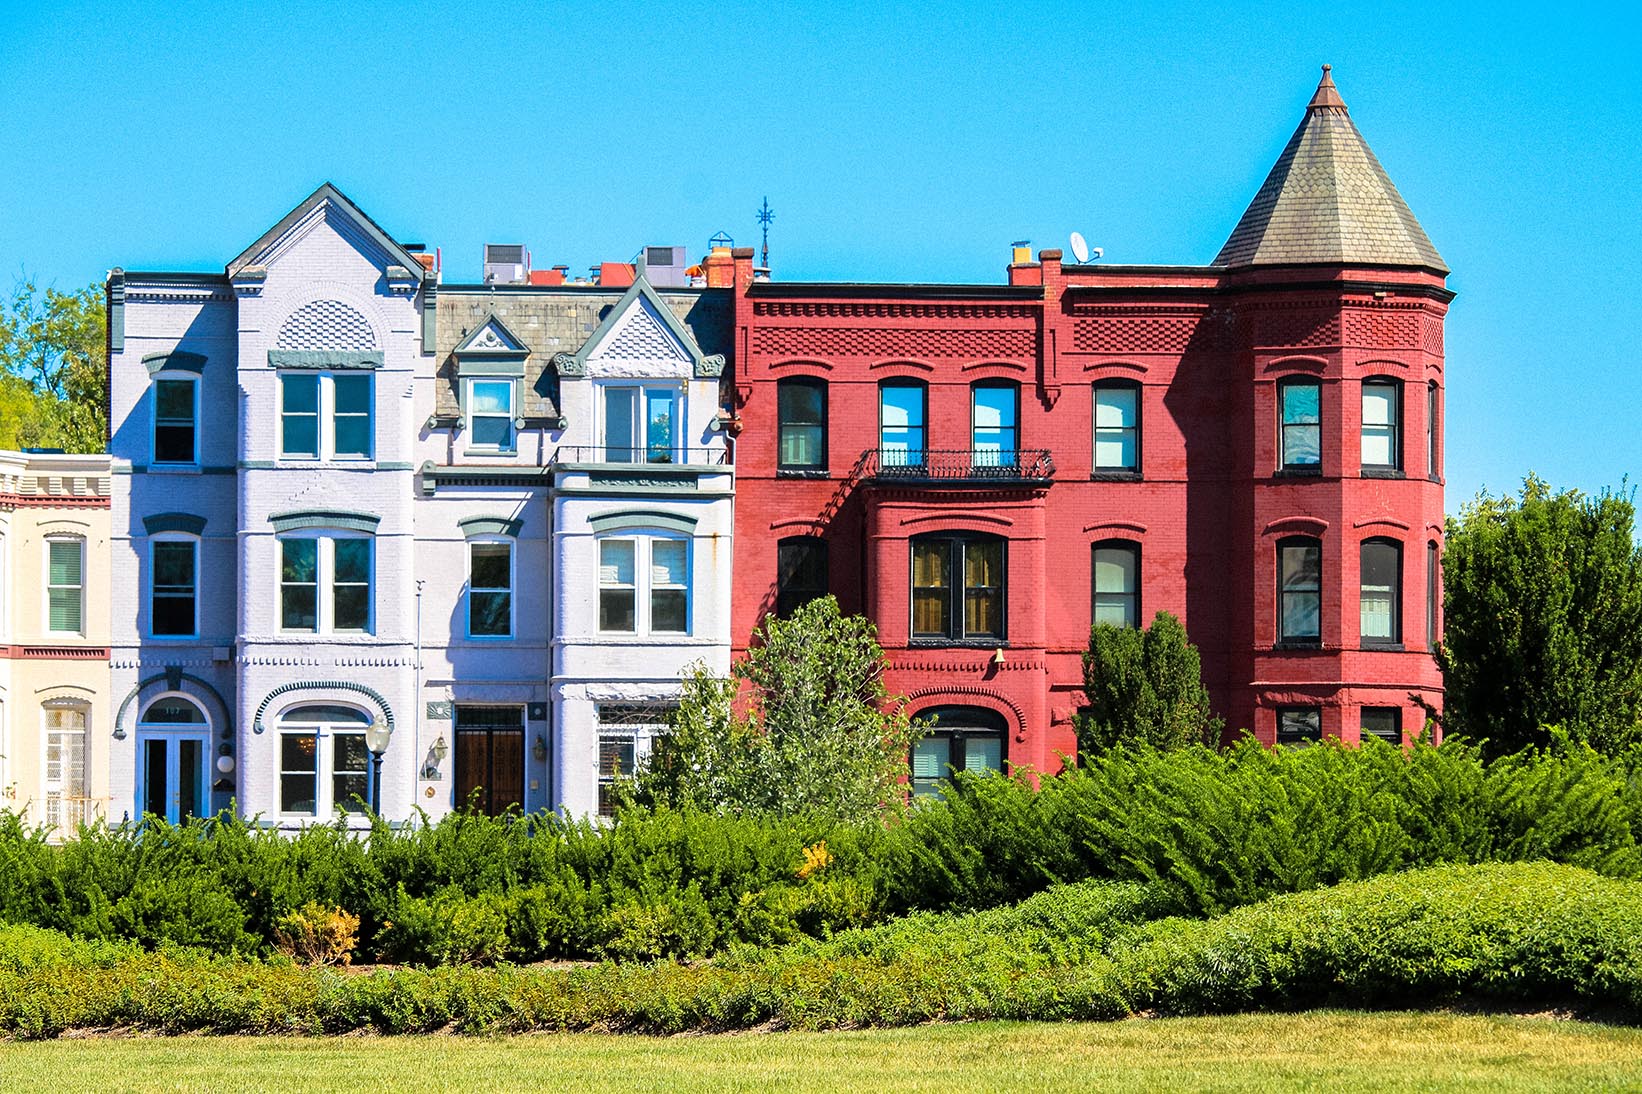 Rowhouses in Capitol Hill, Washington, DC